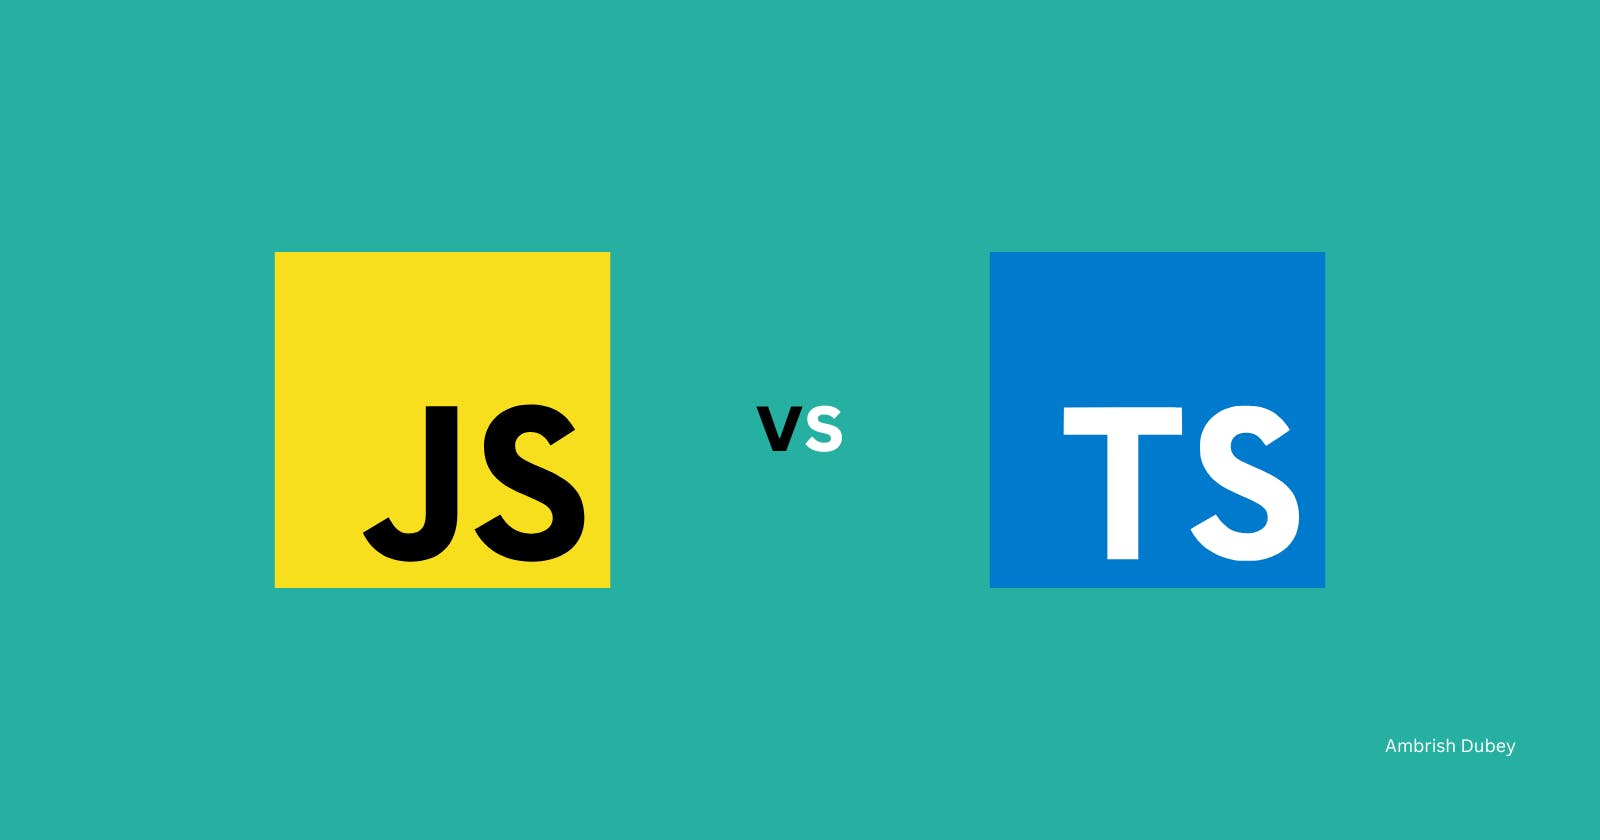 JavaScript vs TypeScript: What is the difference?